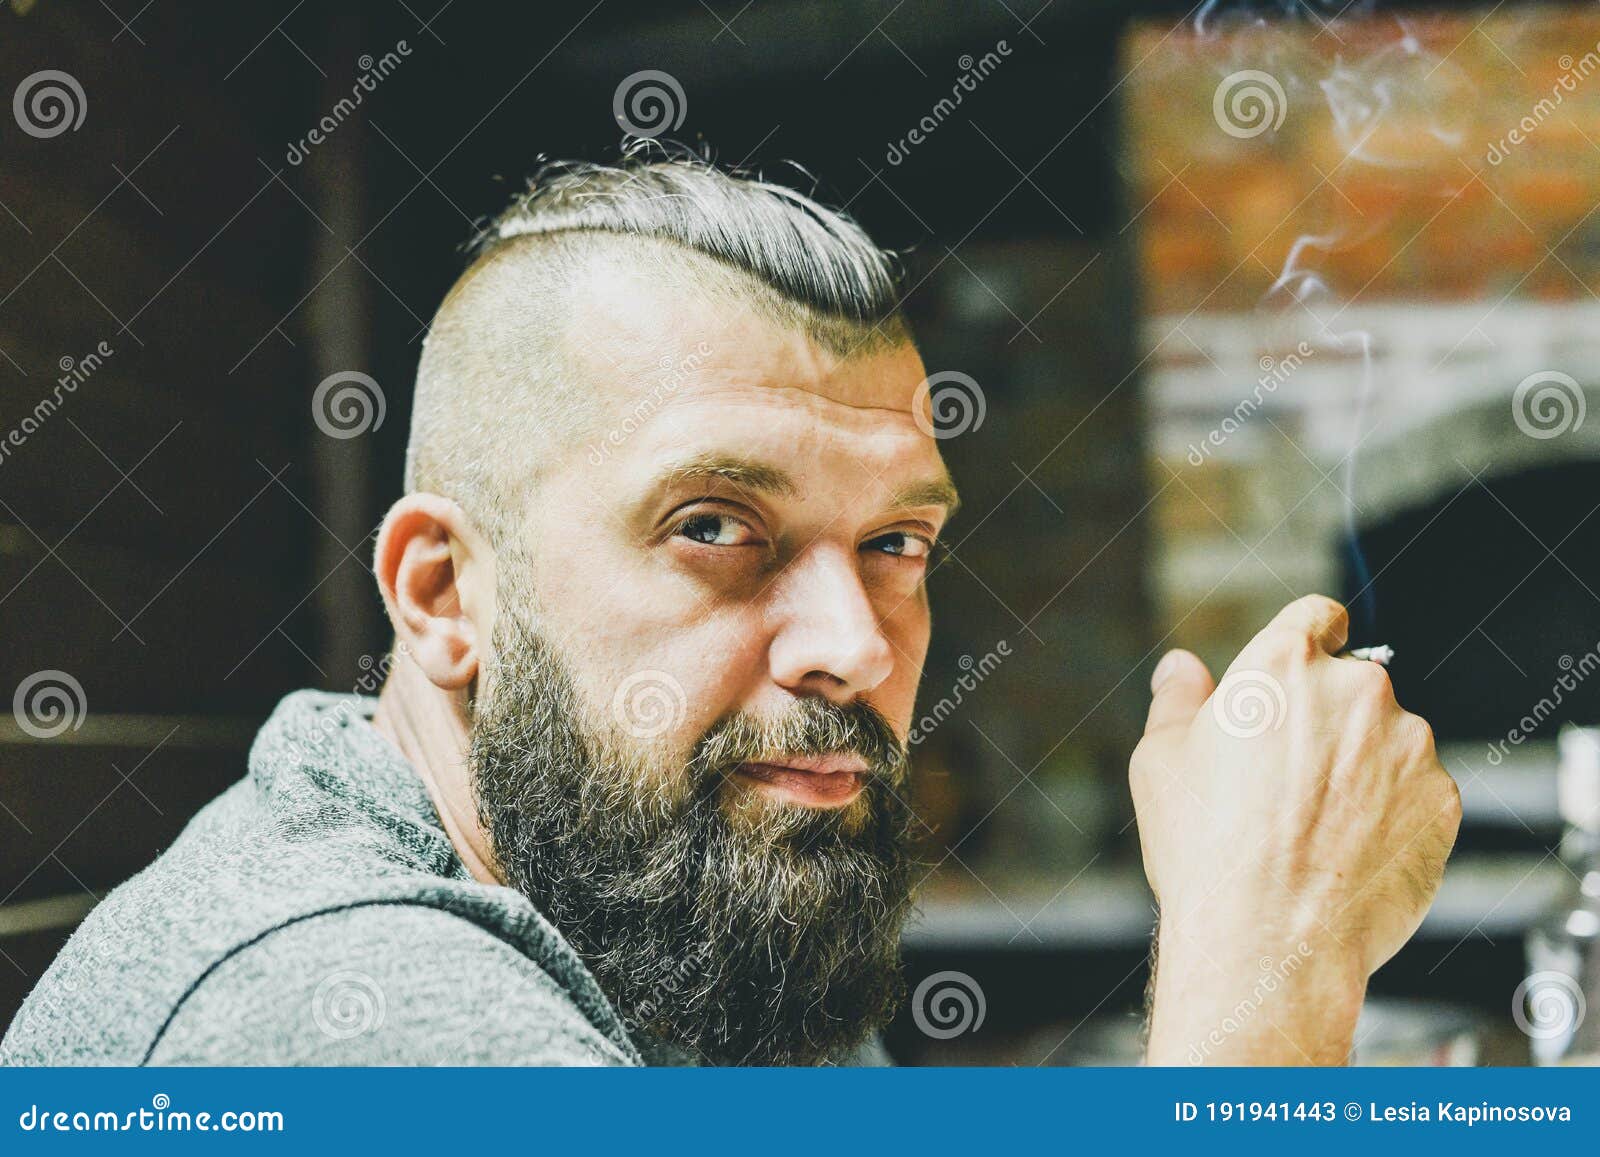 Man with a Beard on the Background of the Fireplace Stock Image - Image of  background, evening: 191941443